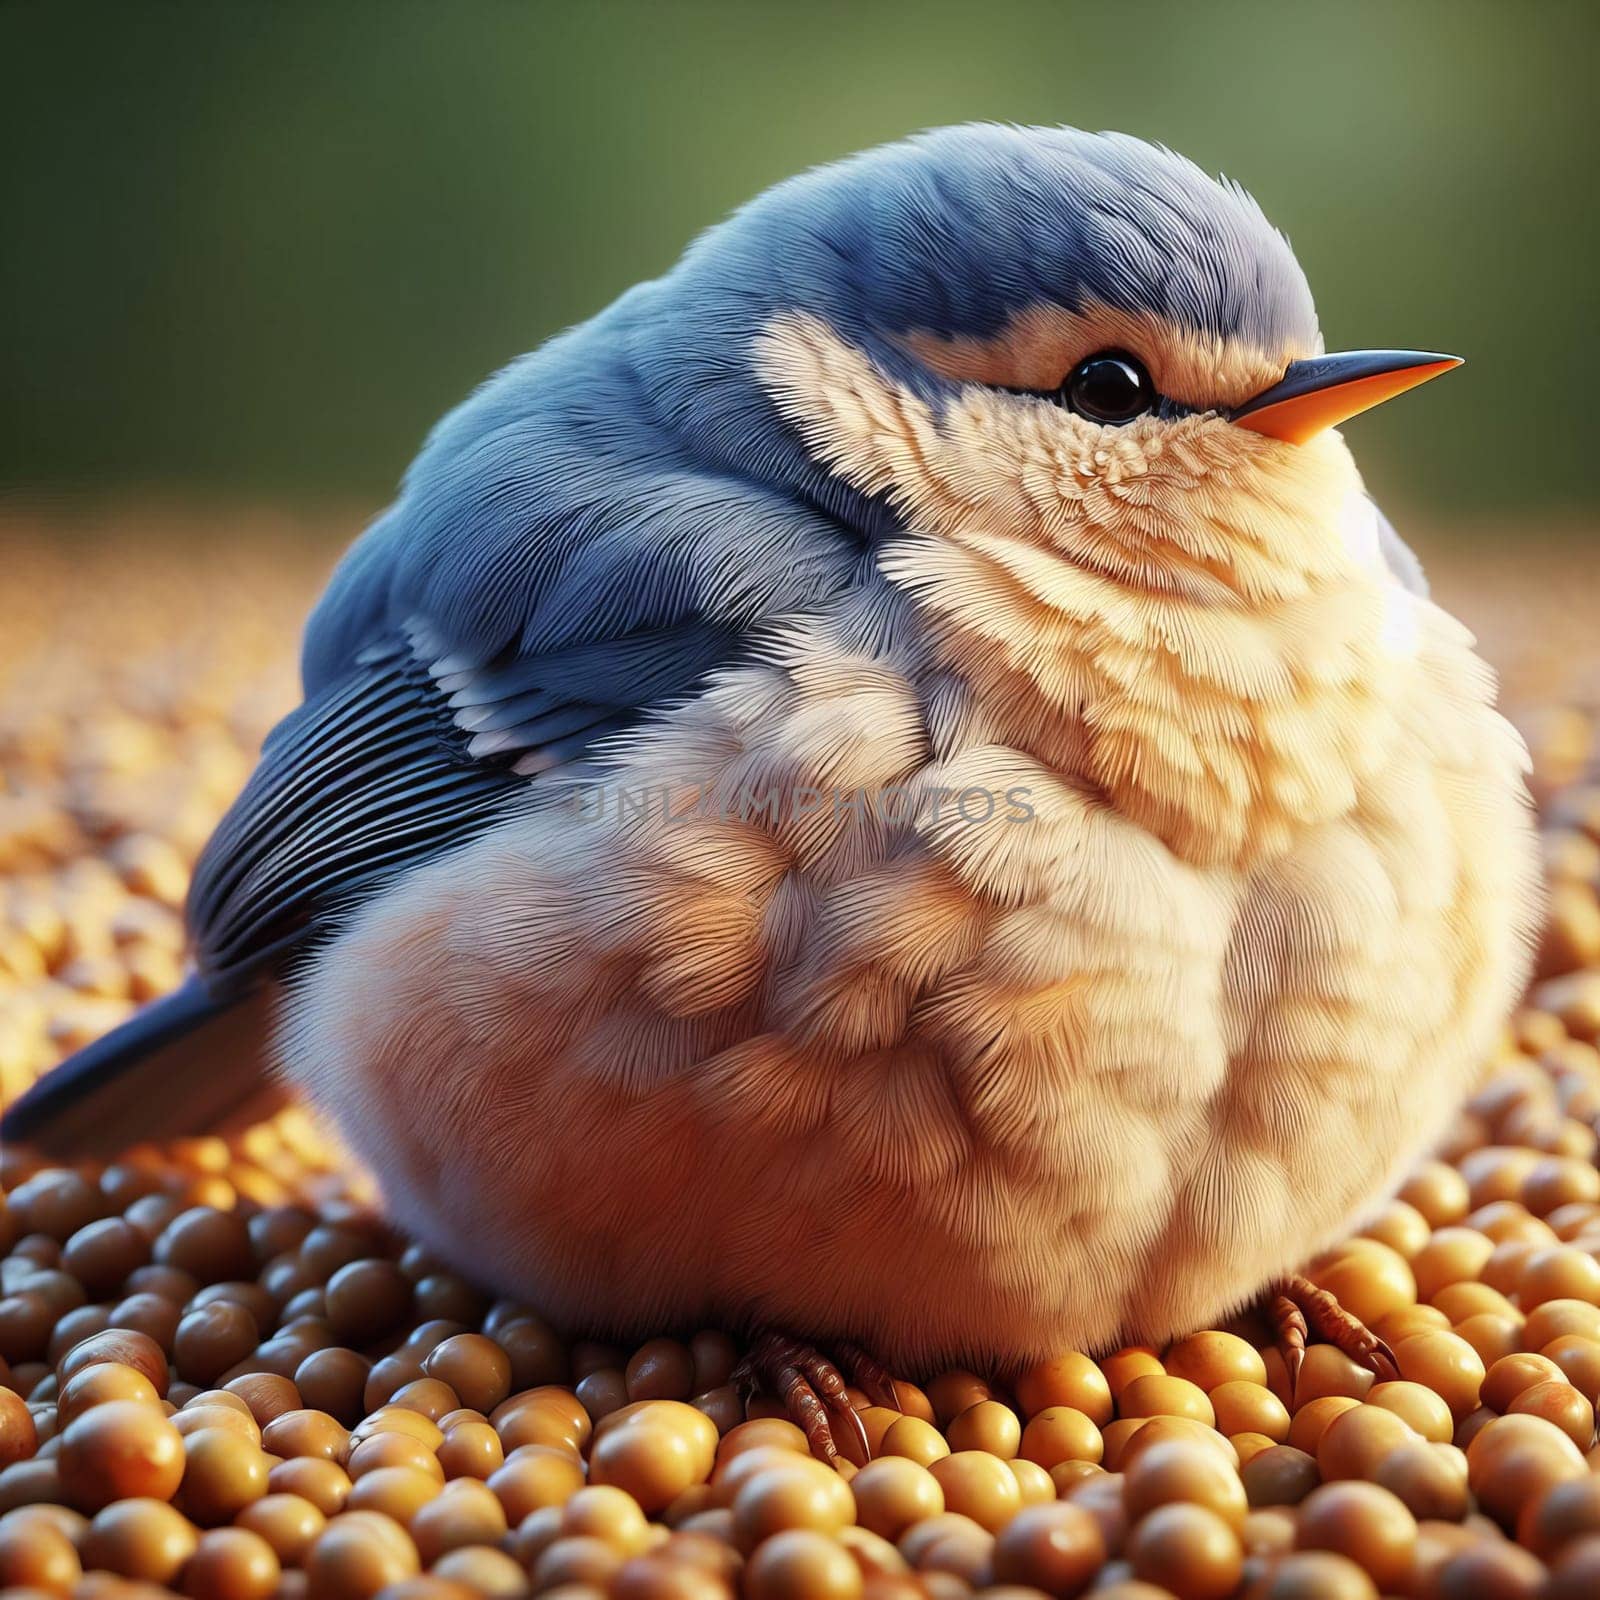 Close-up of a plump blue and orange bird resting on seeds